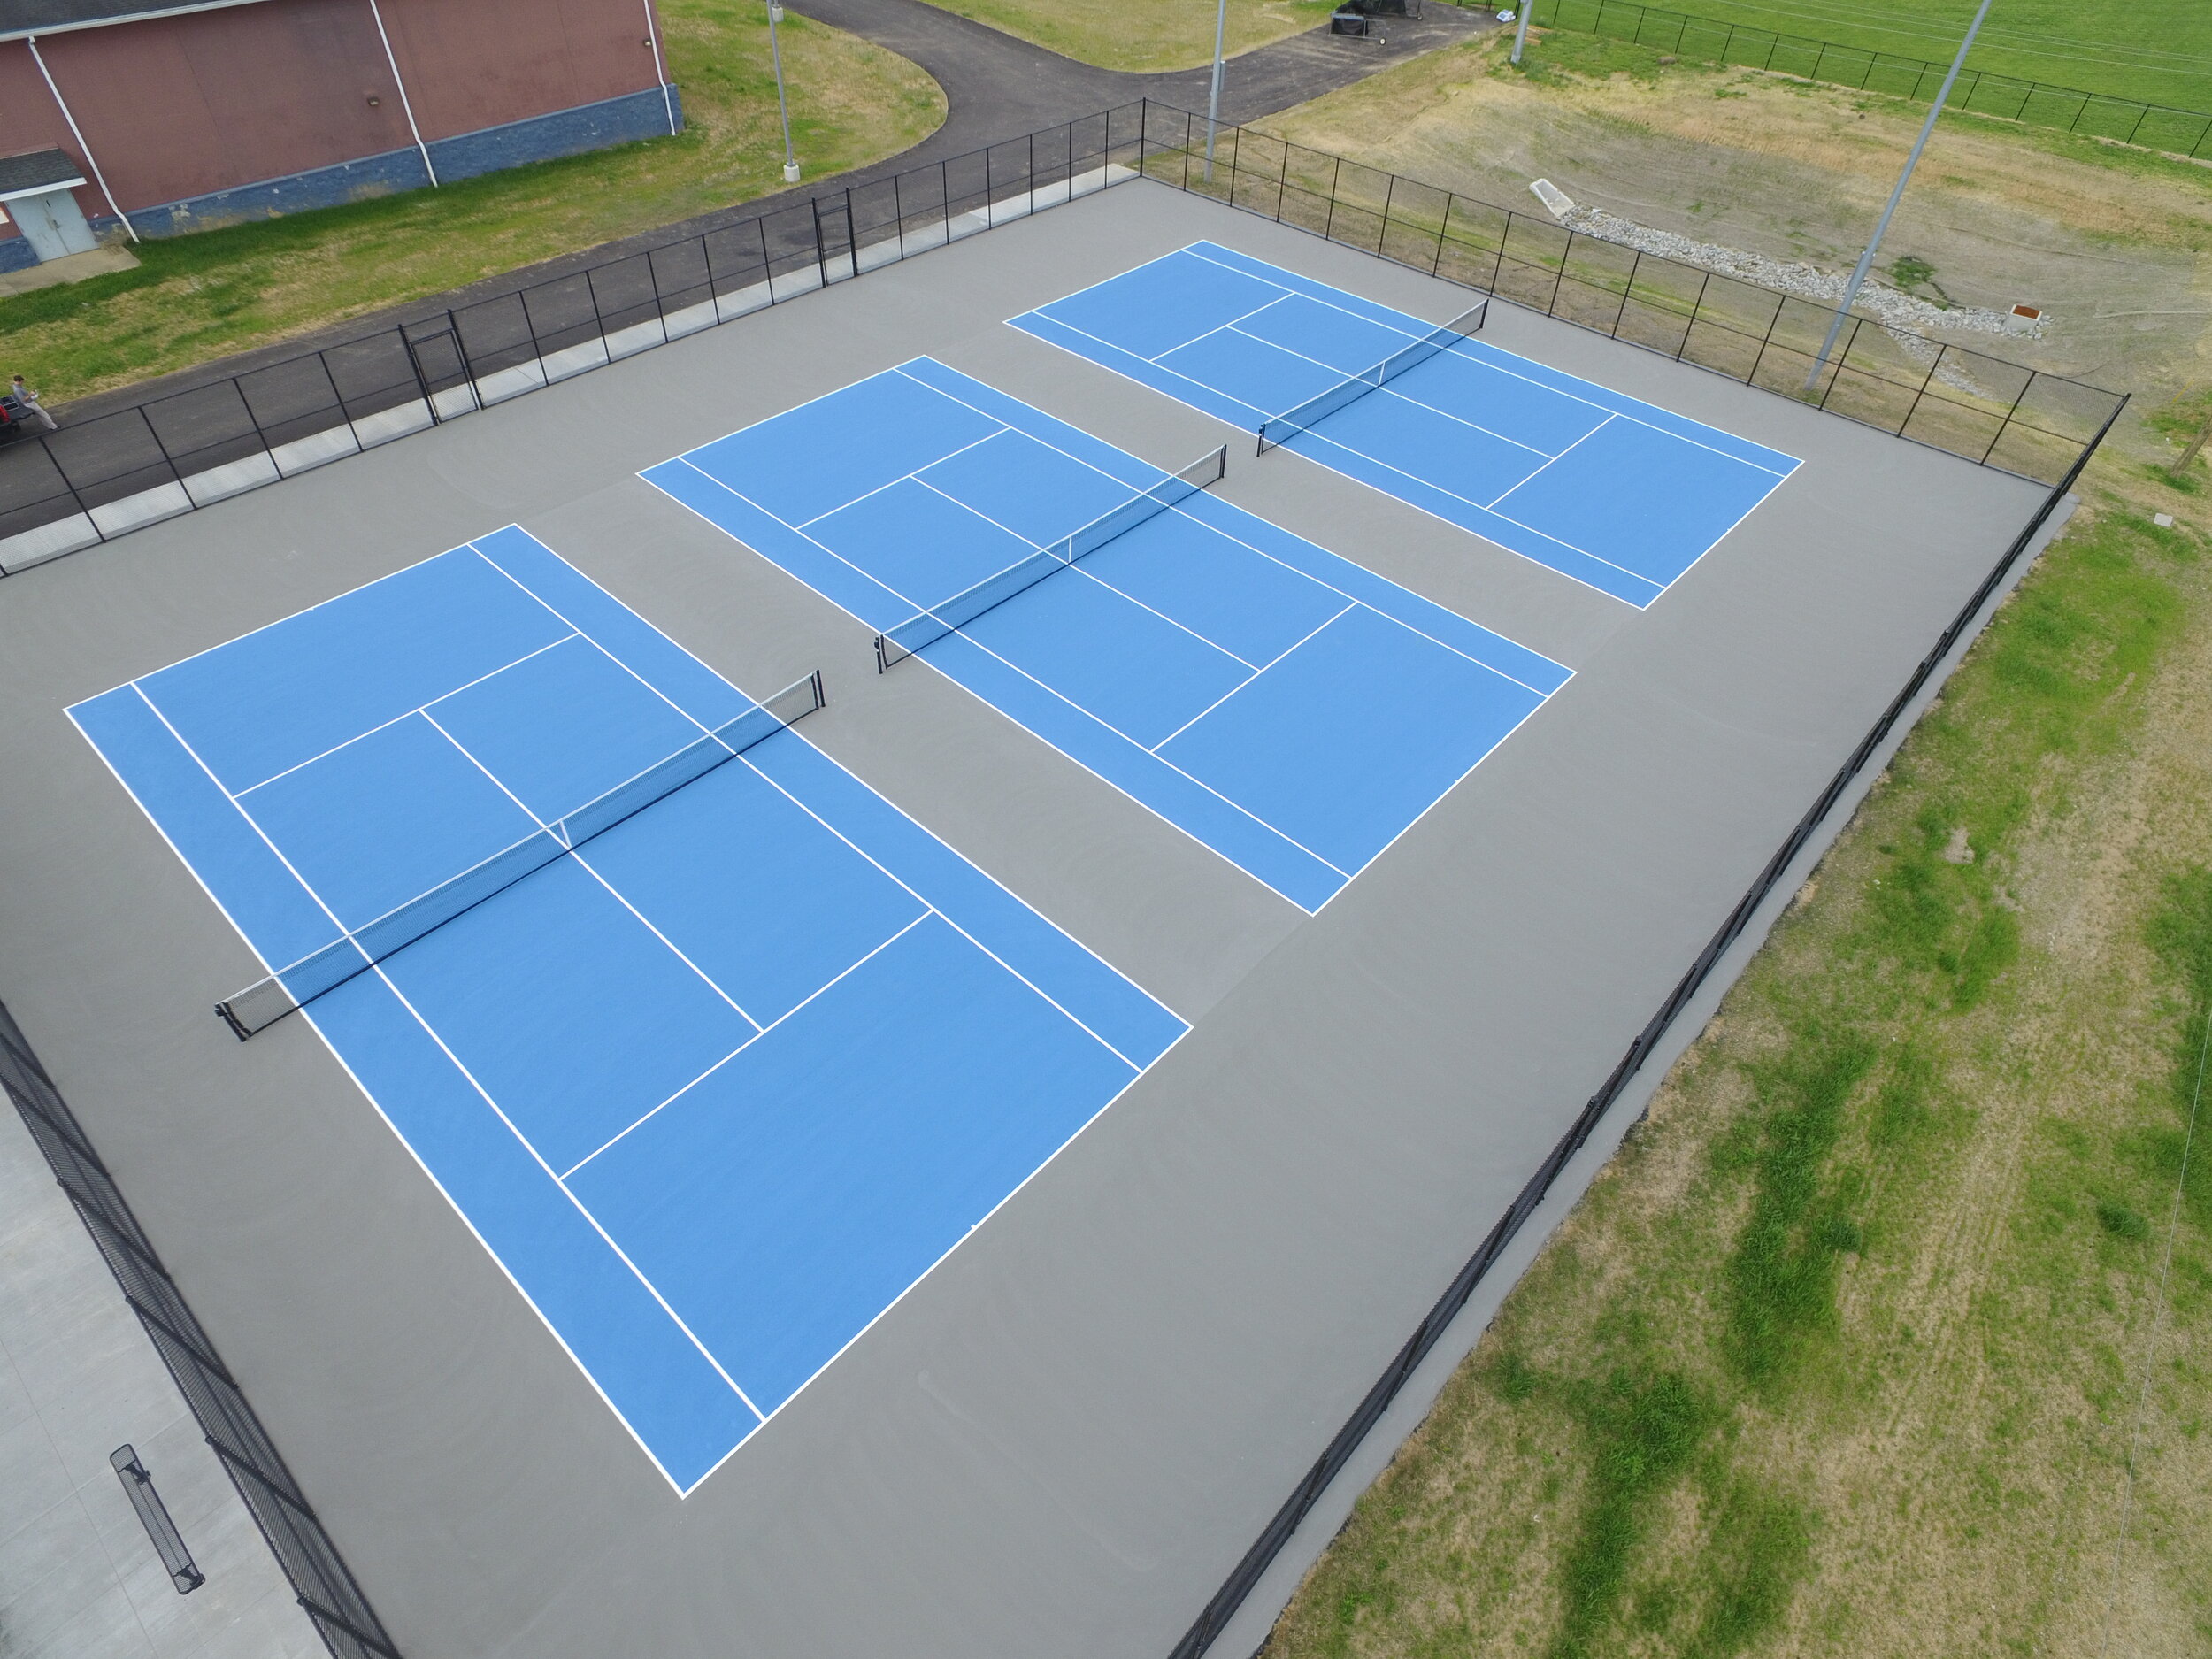 Light Blue and Gray Tennis Courts.JPG